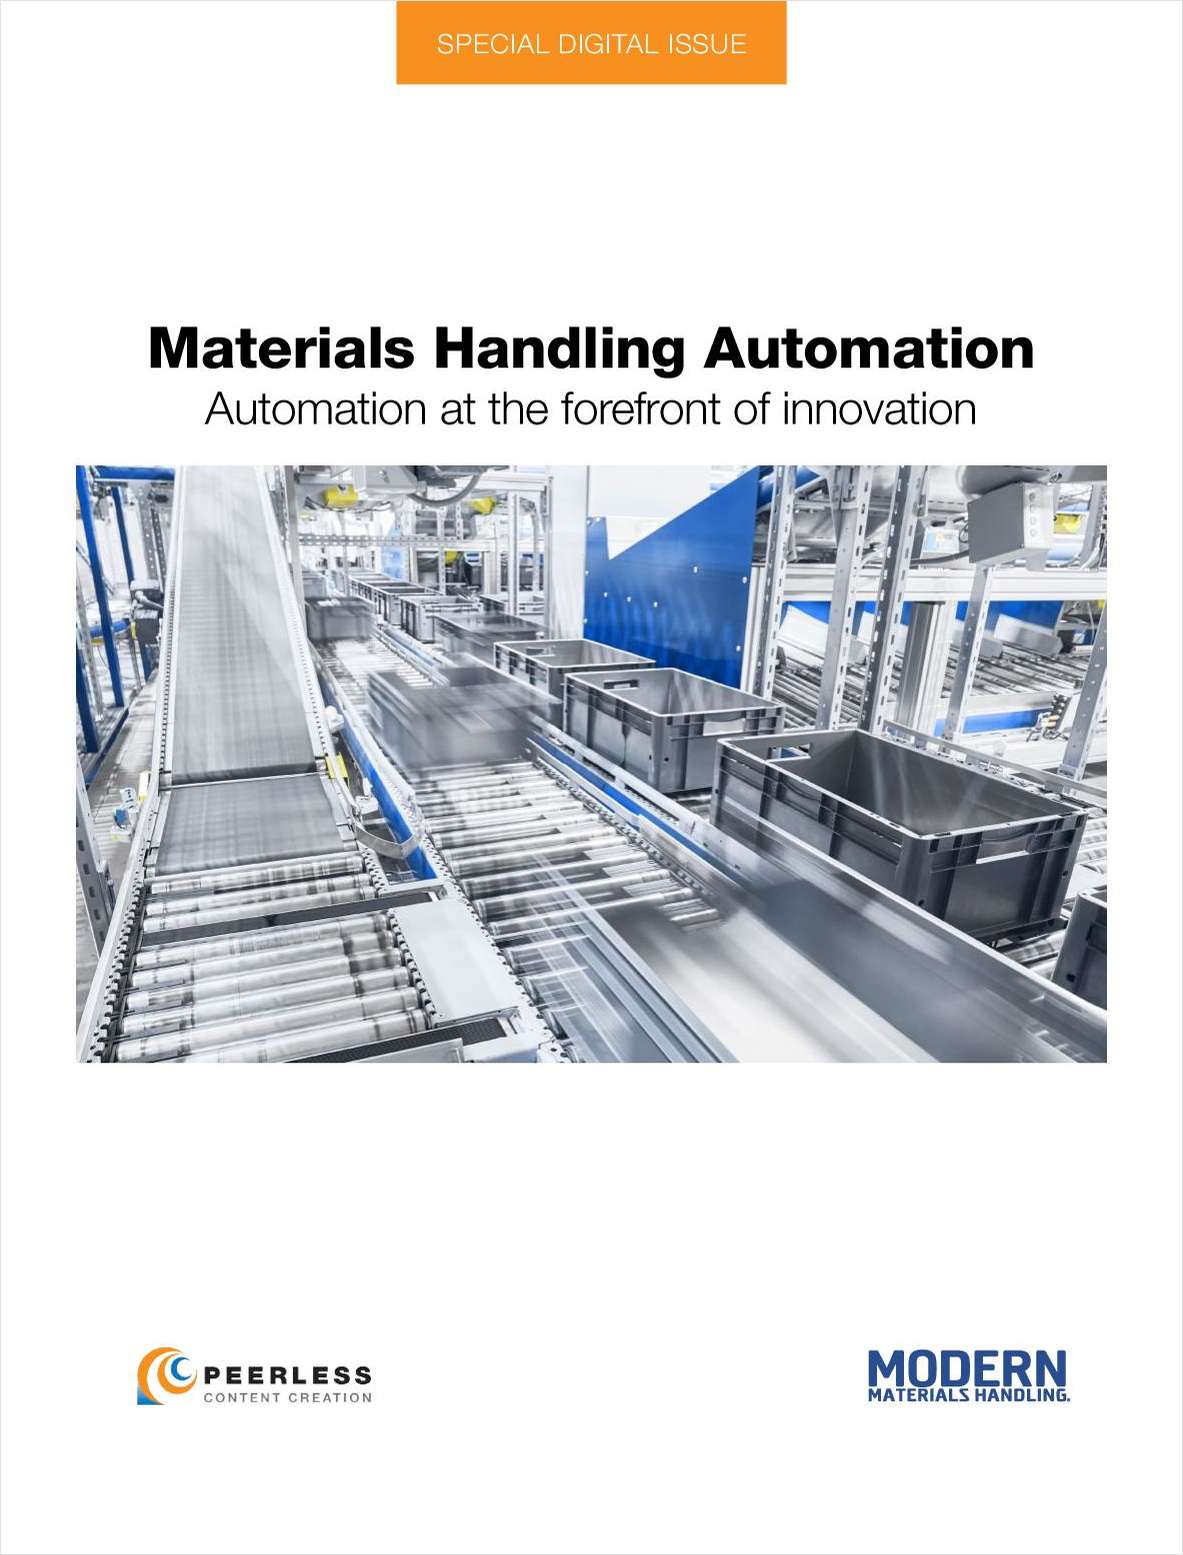 Materials Handling Automation: Automation at the forefront of innovation